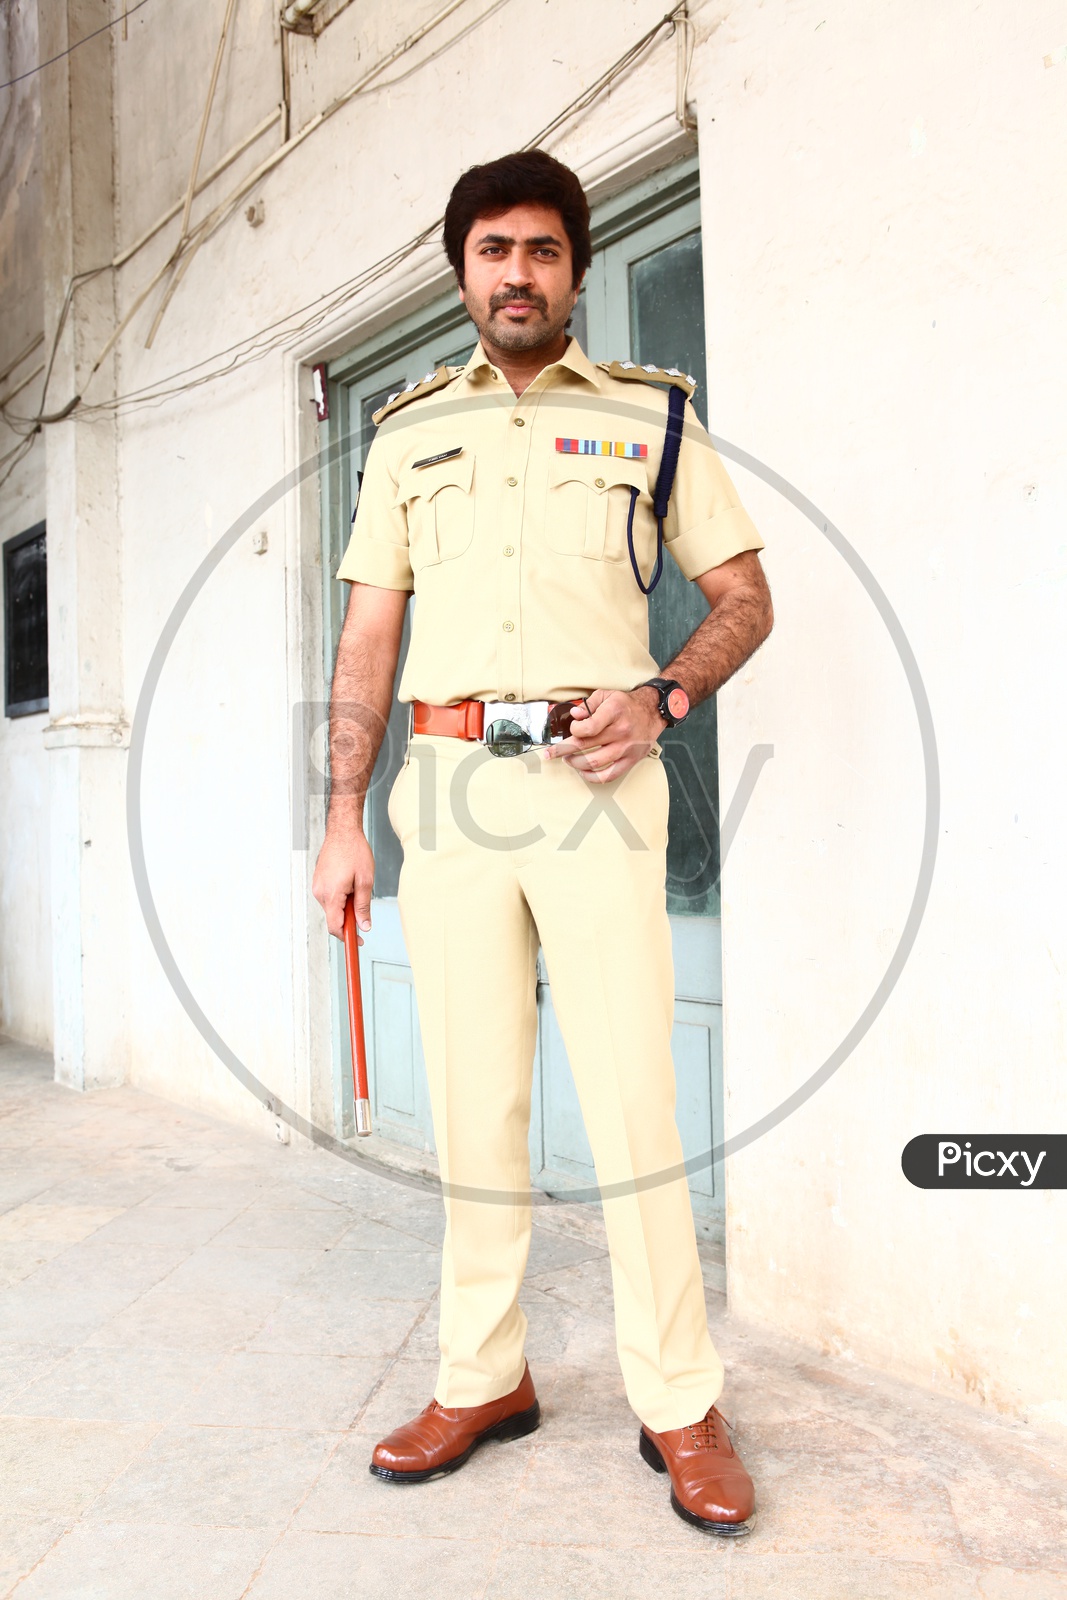 young Indian Man Wearing Police Uniform And Posing